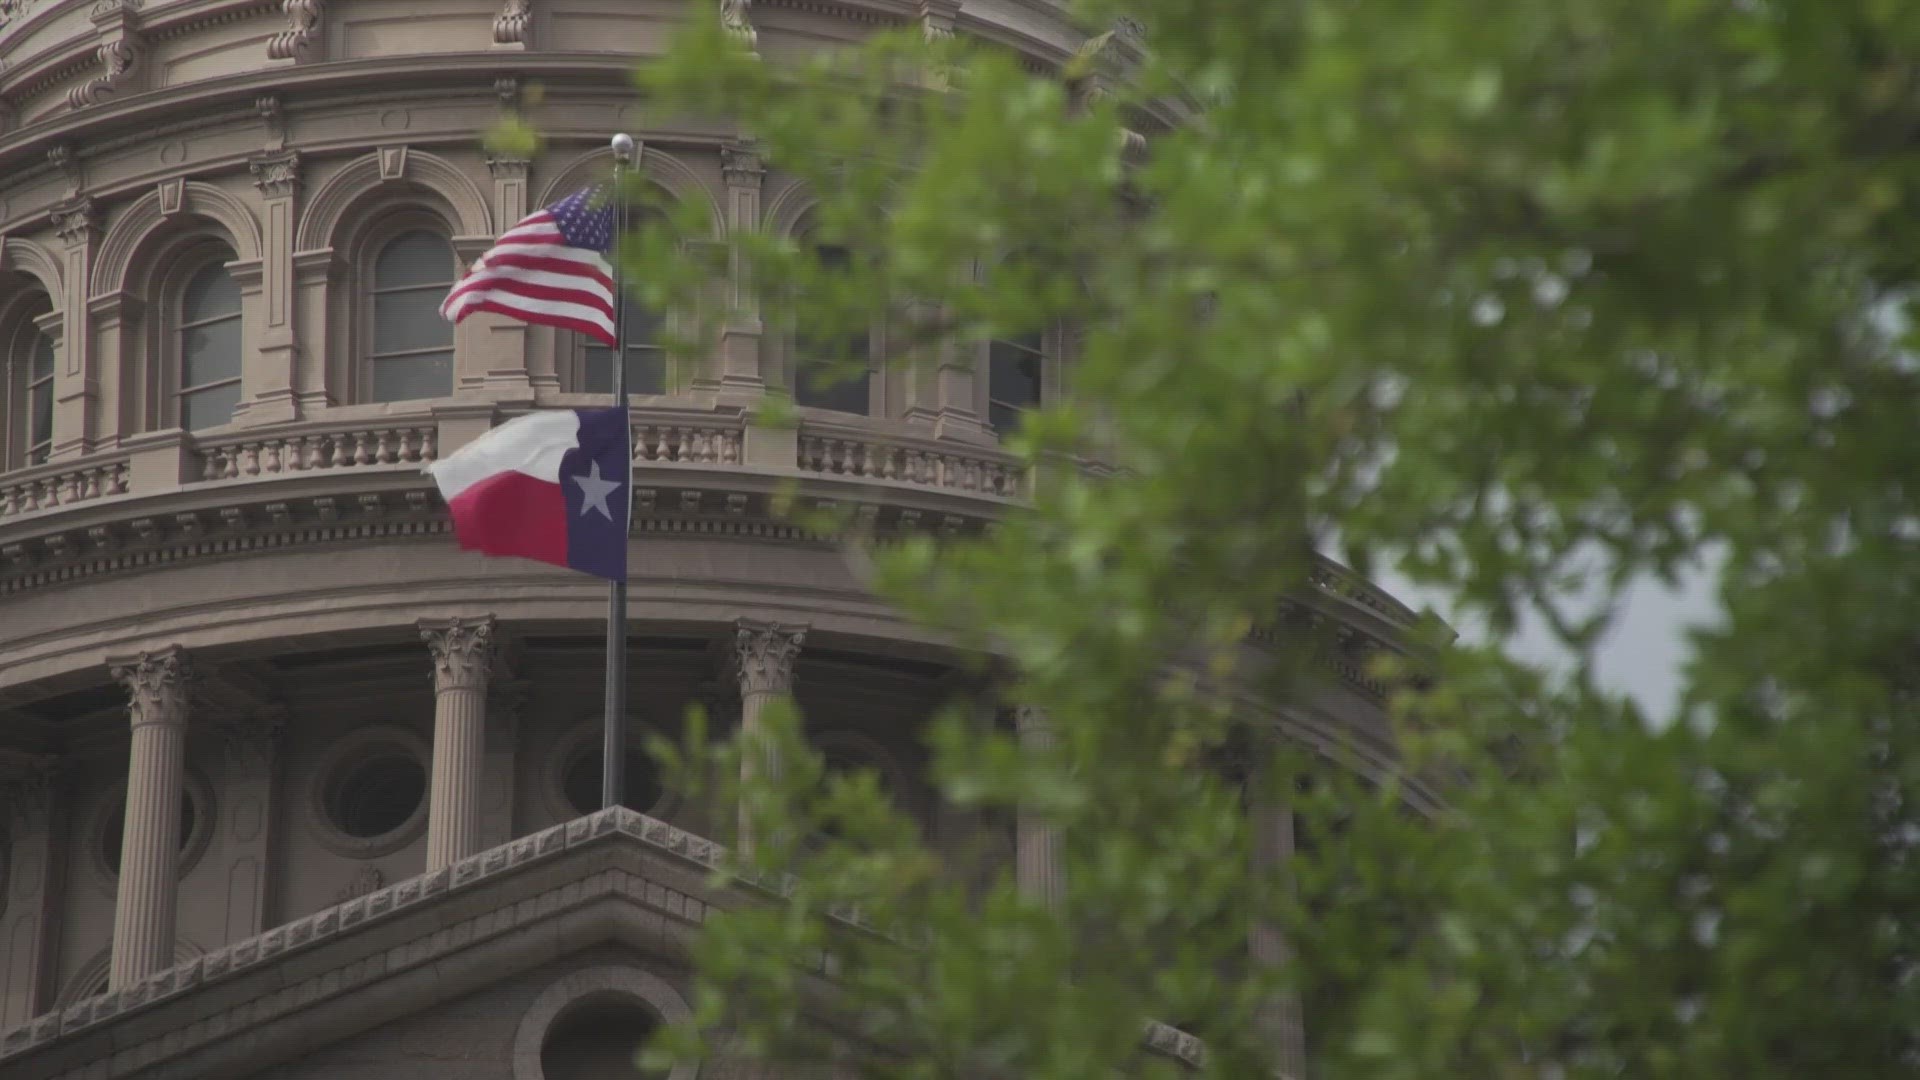 Several gun reform bills were brought to the table at this year's Texas legislative session.